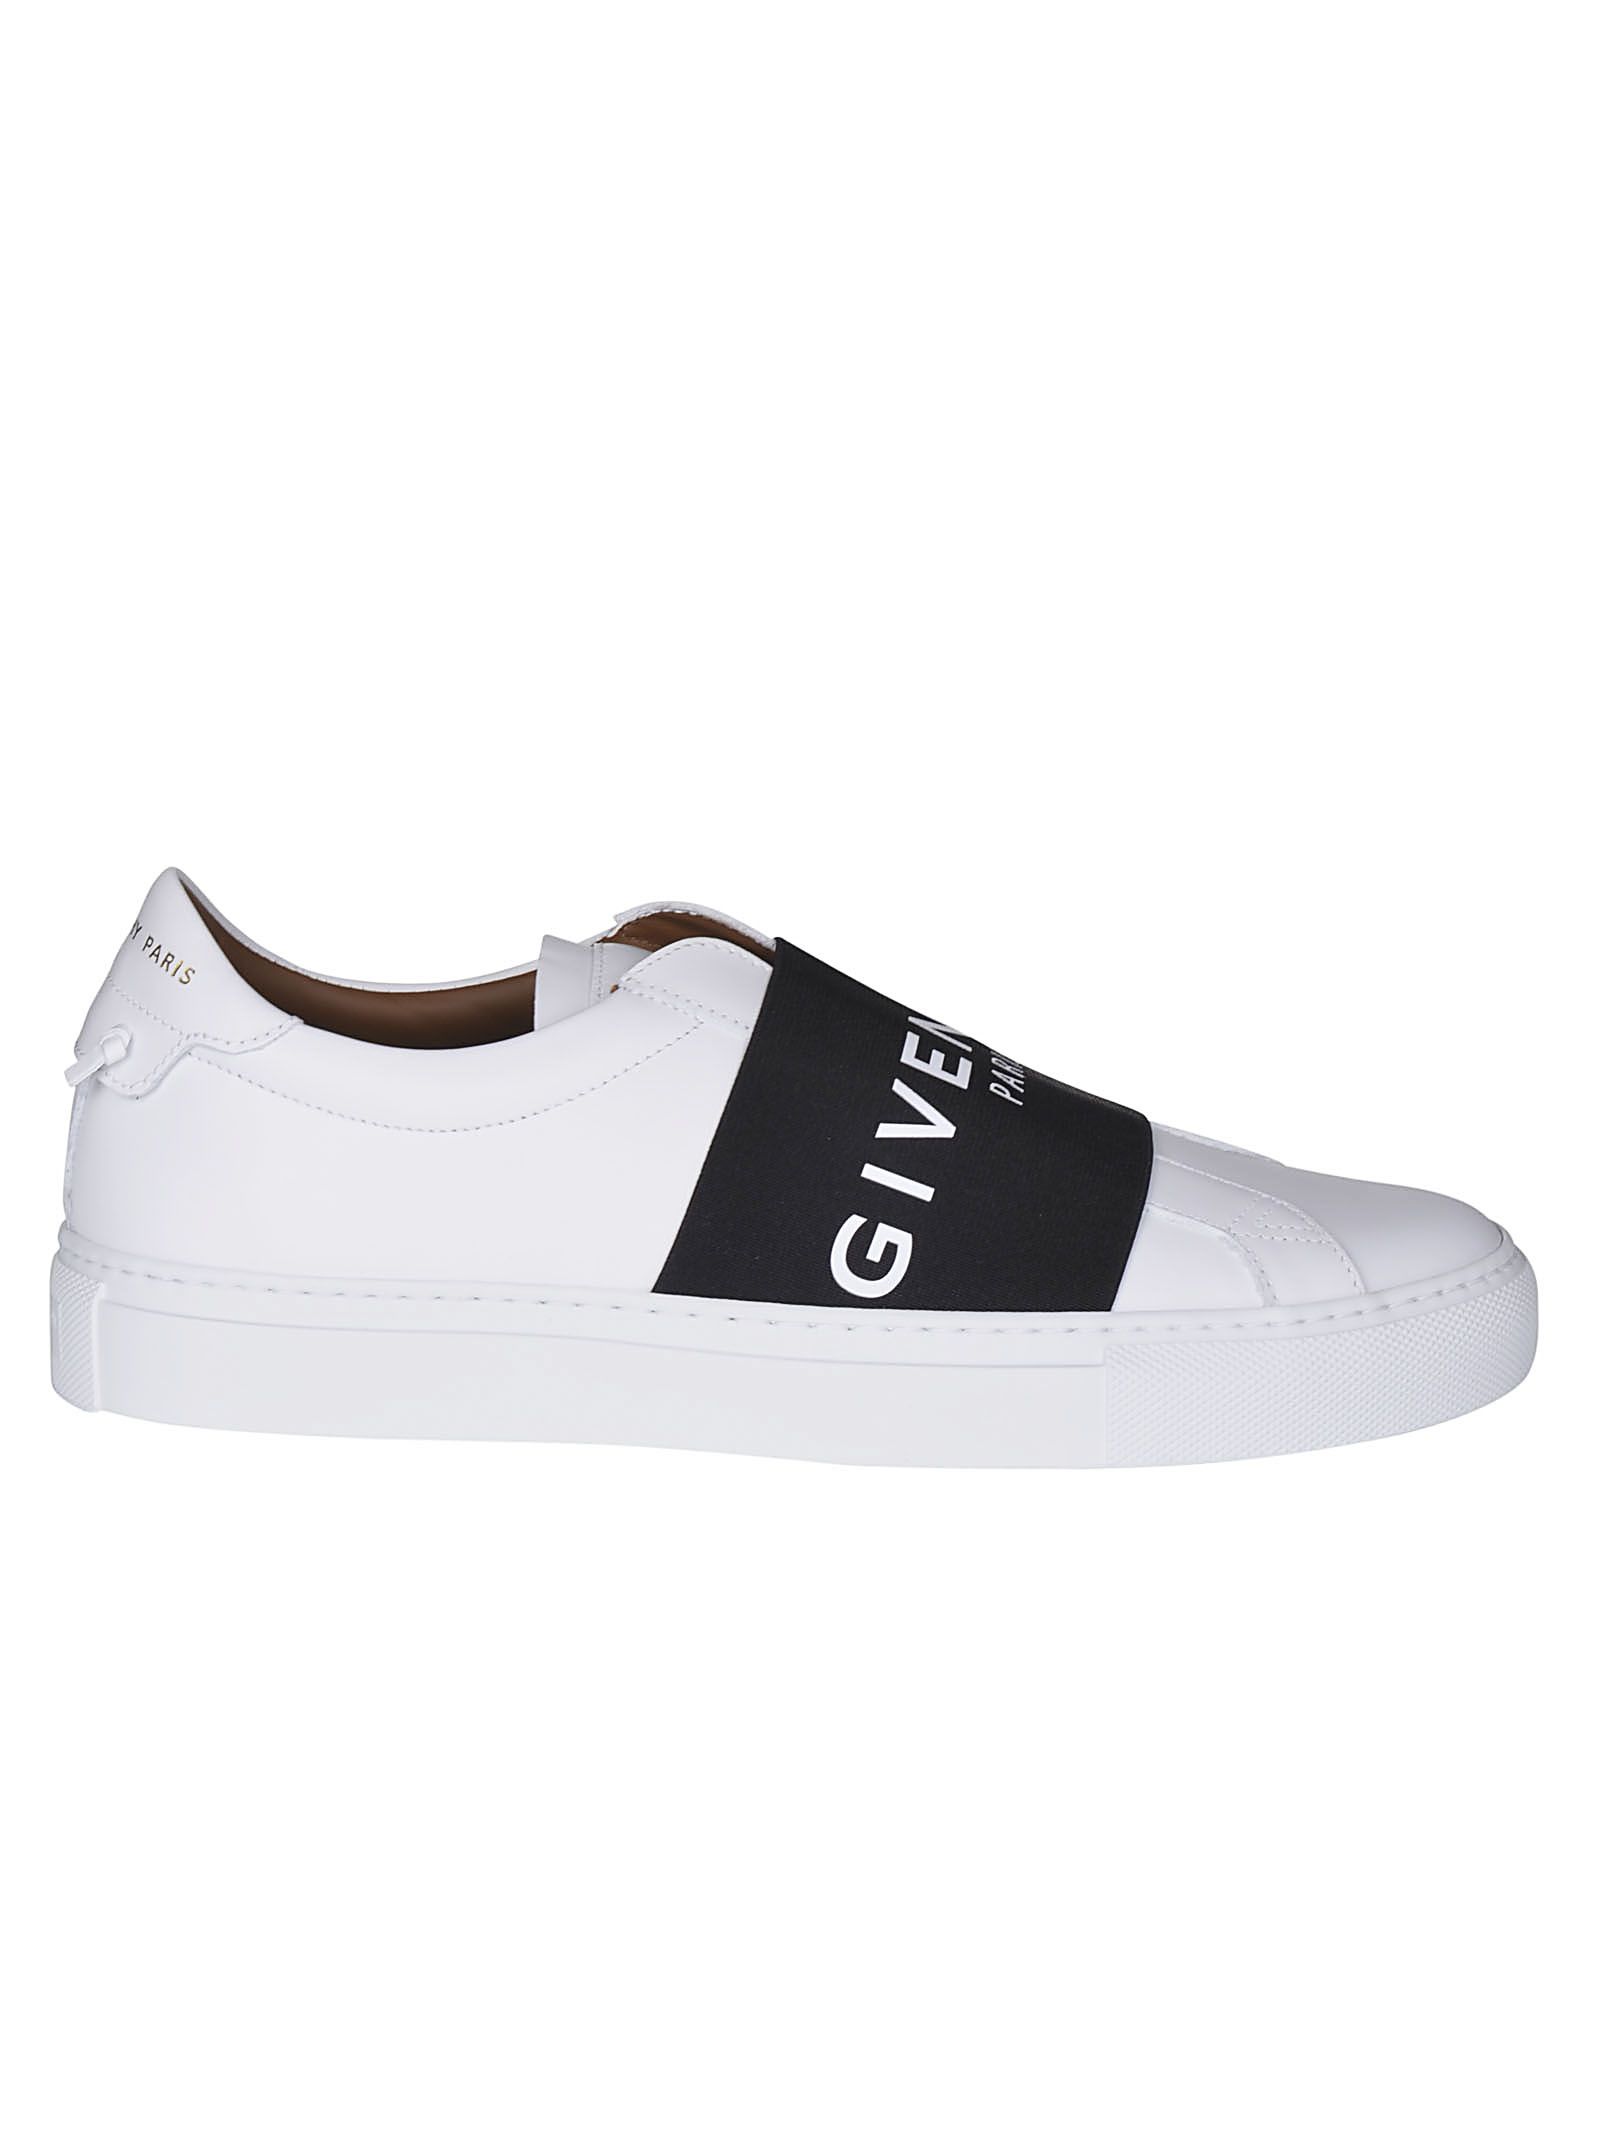 italist | Best price in the market for Givenchy Givenchy Urban Street ...